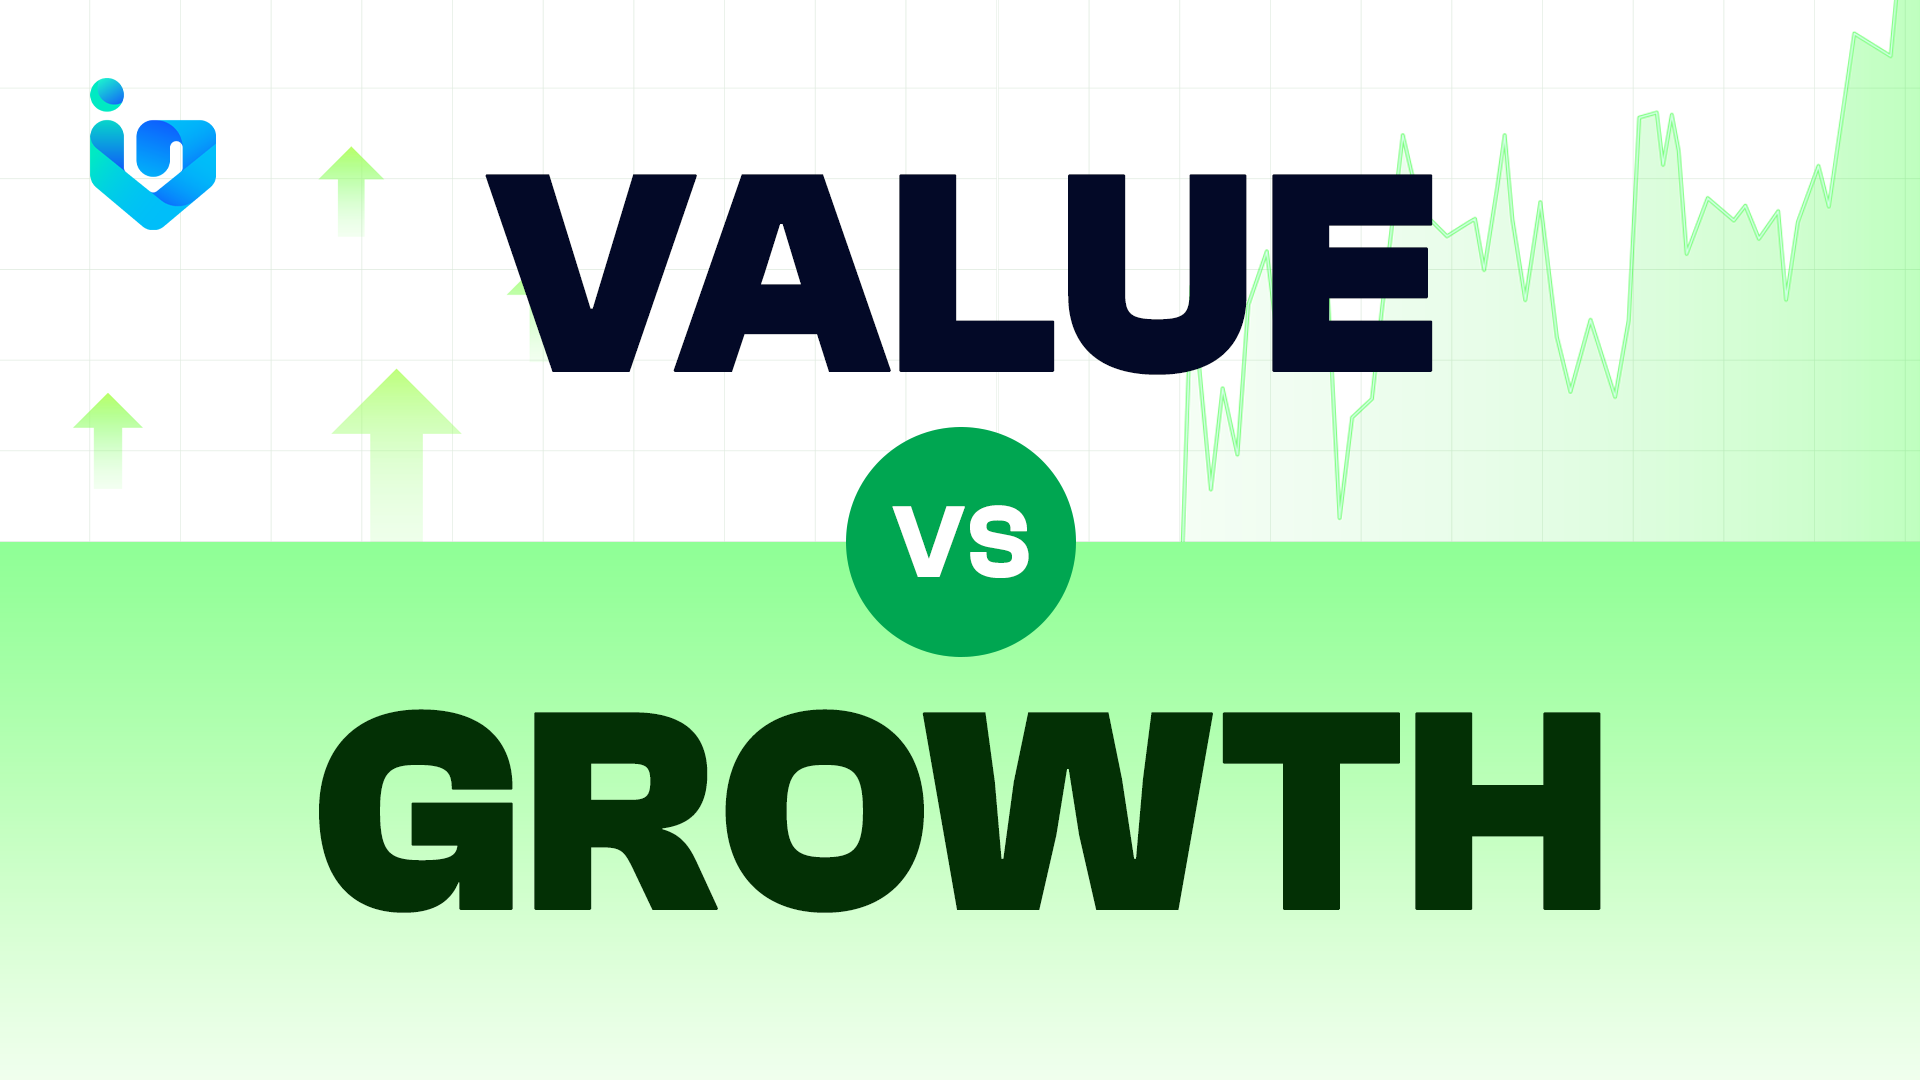 Value Investing vs. Growth Investing